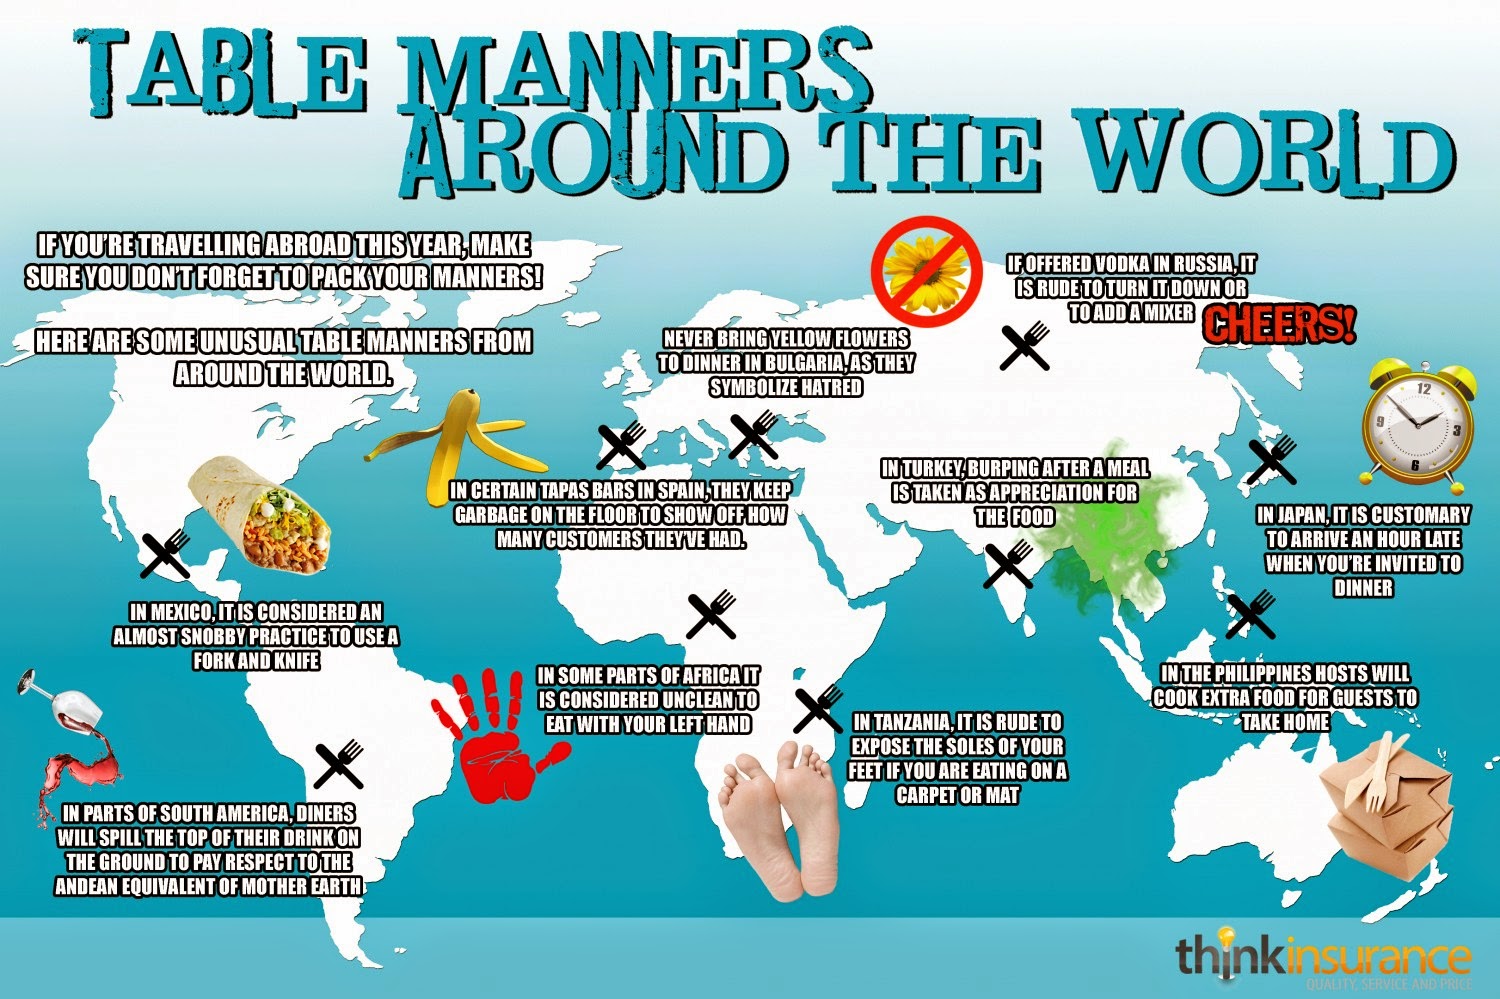 World well english. Manners around the World. Table manners in different Countries. Good manners around the World. Table manners around.